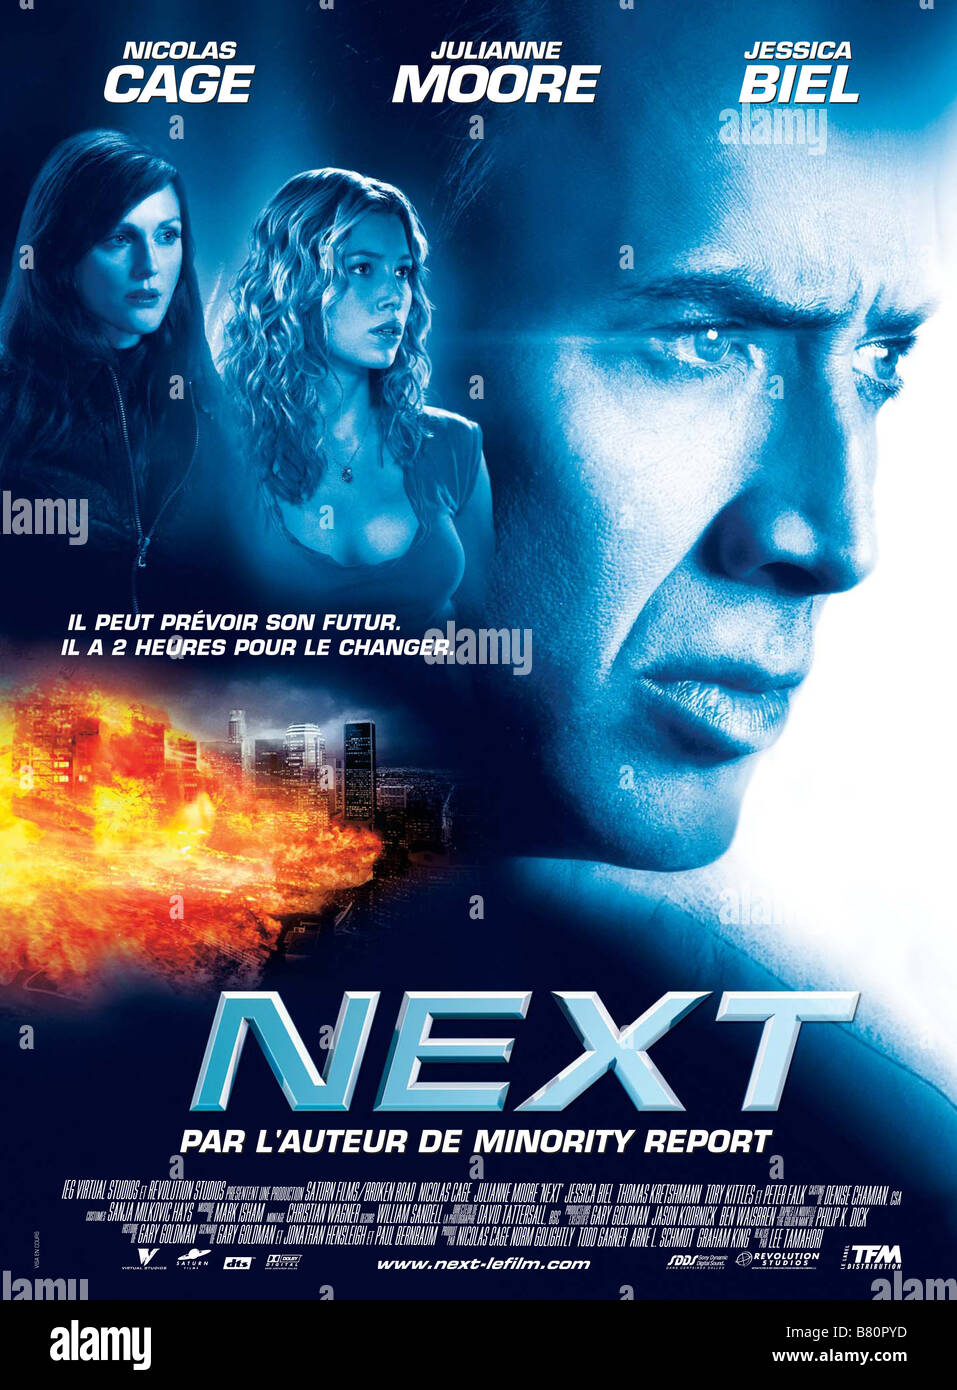 Next Next Year 2007 Usa Affiche Poster Julianne Moore Jessica Stock Photo Alamy Follow the guidelines below for acceptable files: https www alamy com stock photo next next year 2007 usa affiche poster julianne moore jessica biel 22145633 html